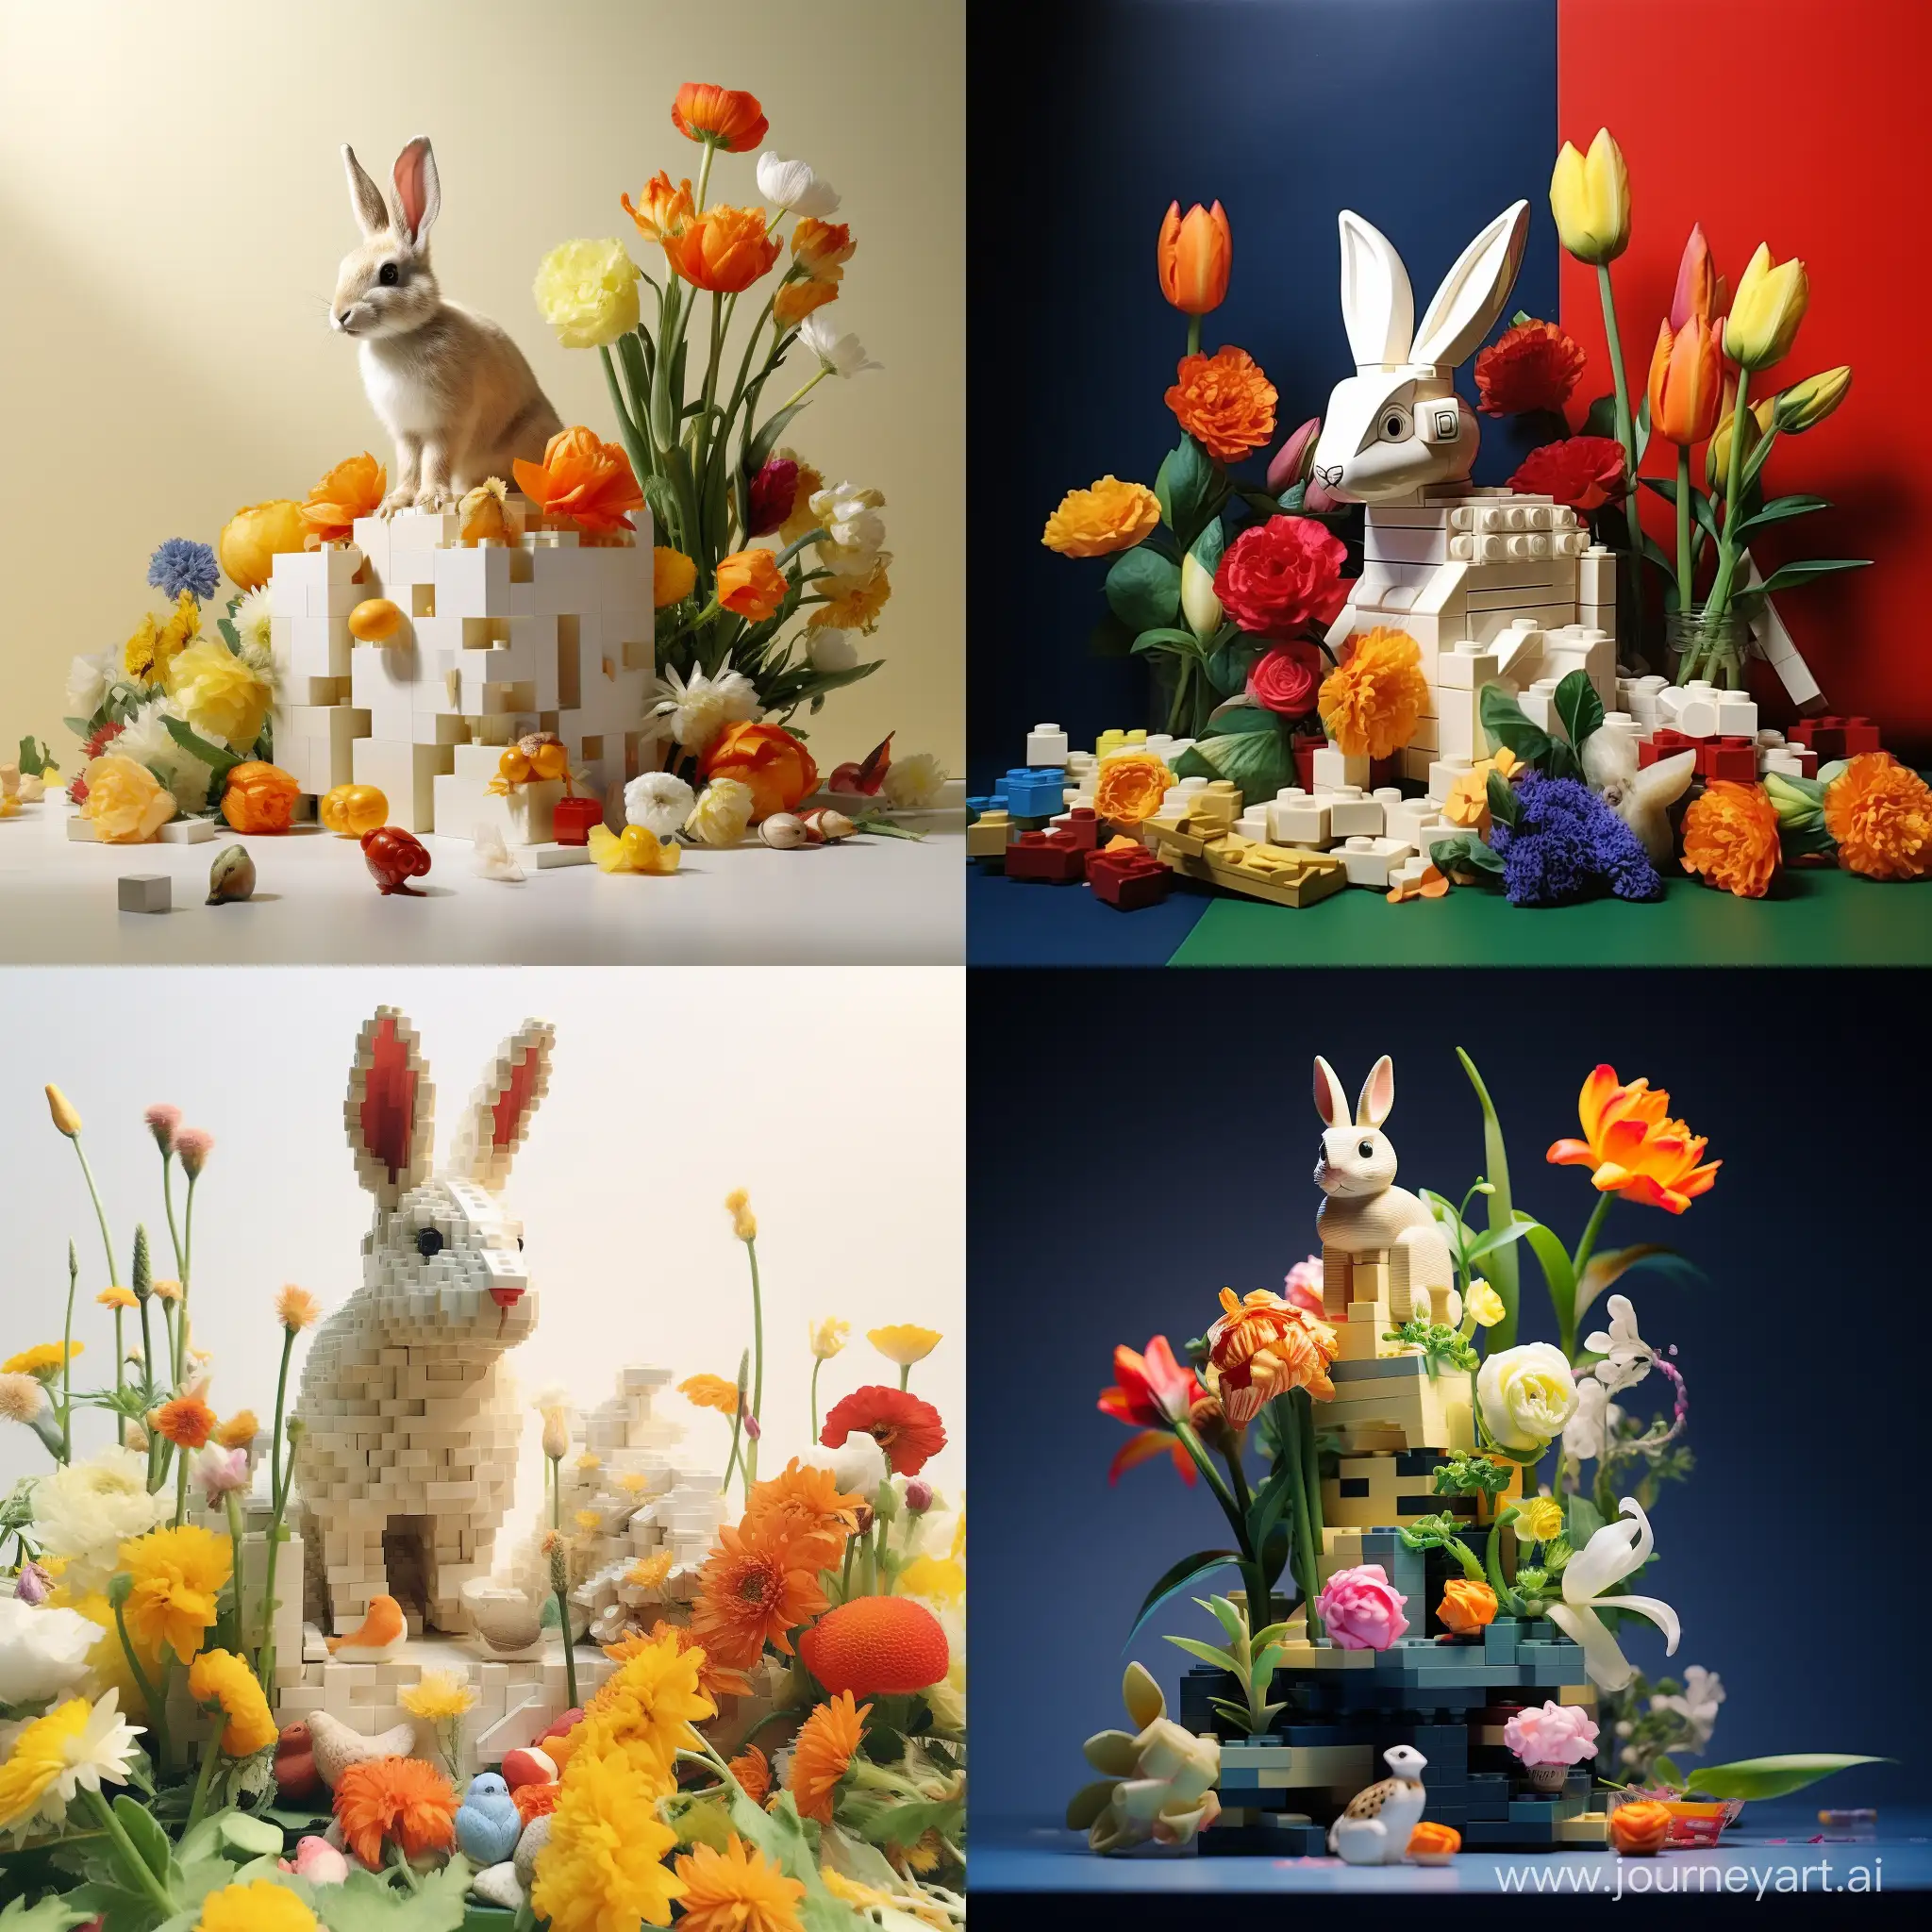 Creative-Lego-Building-with-Playful-Rabbits-and-Blooming-Flowers